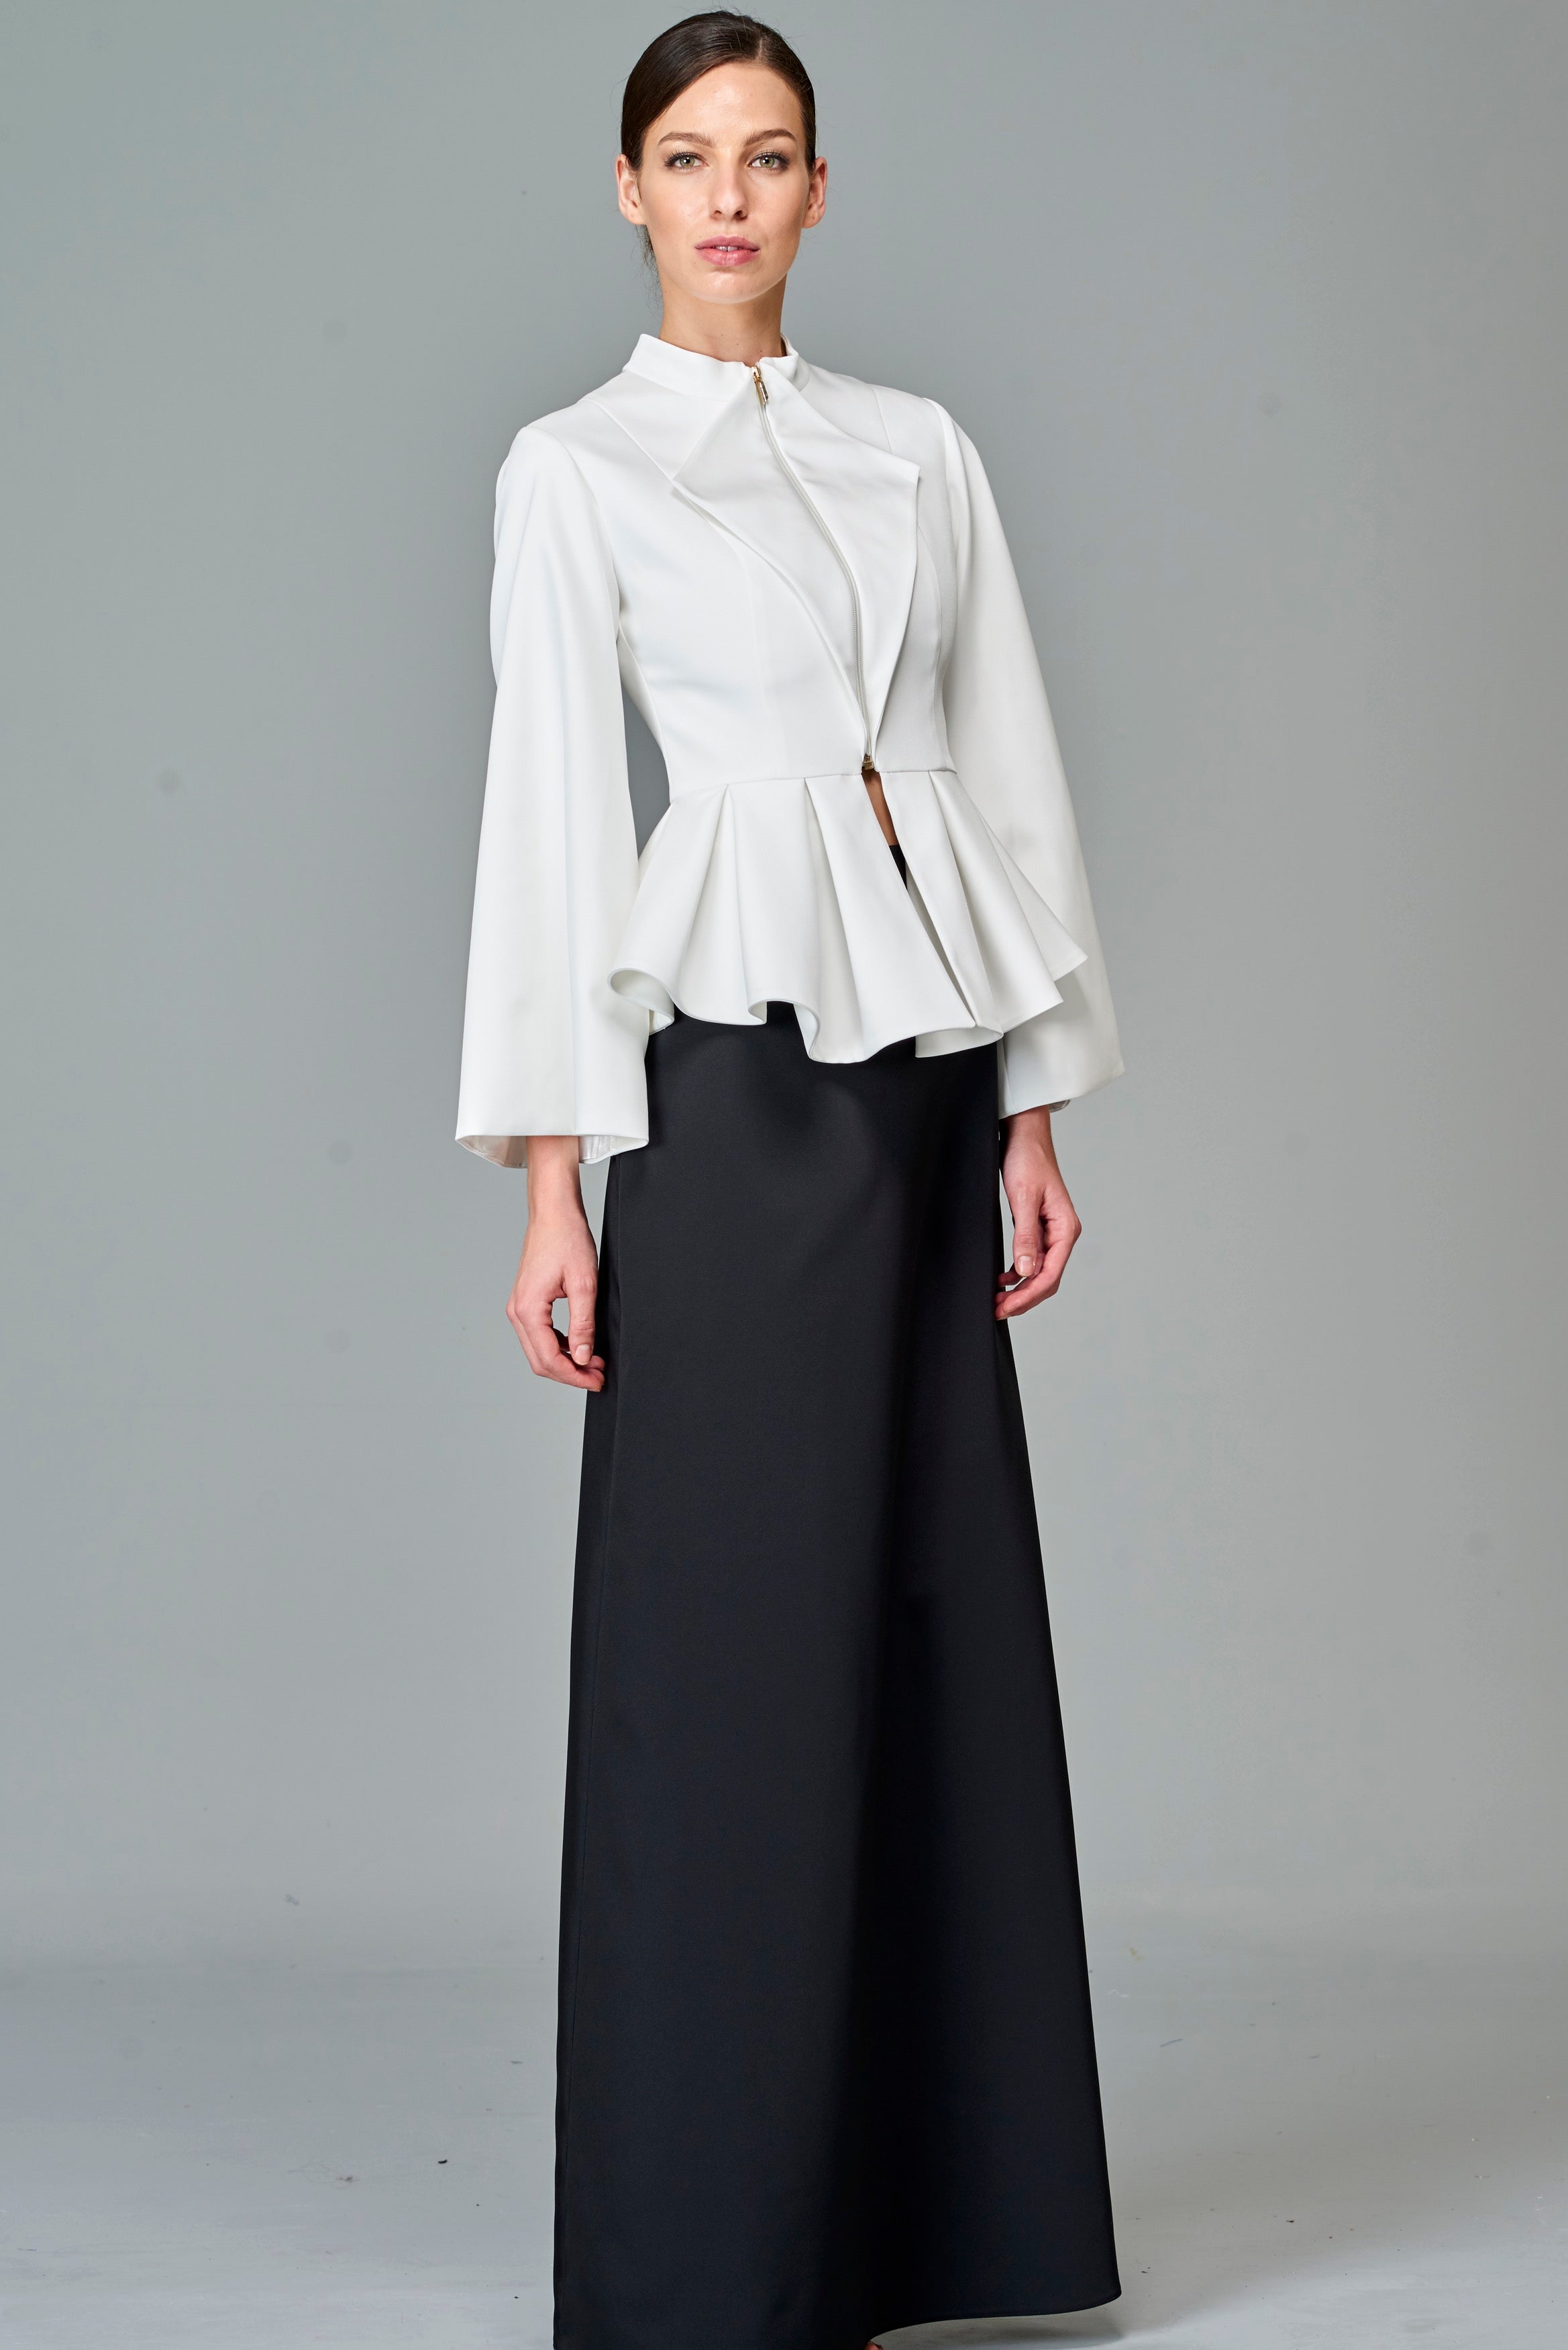 Ruffled Jacket with A-Line Long Skirt